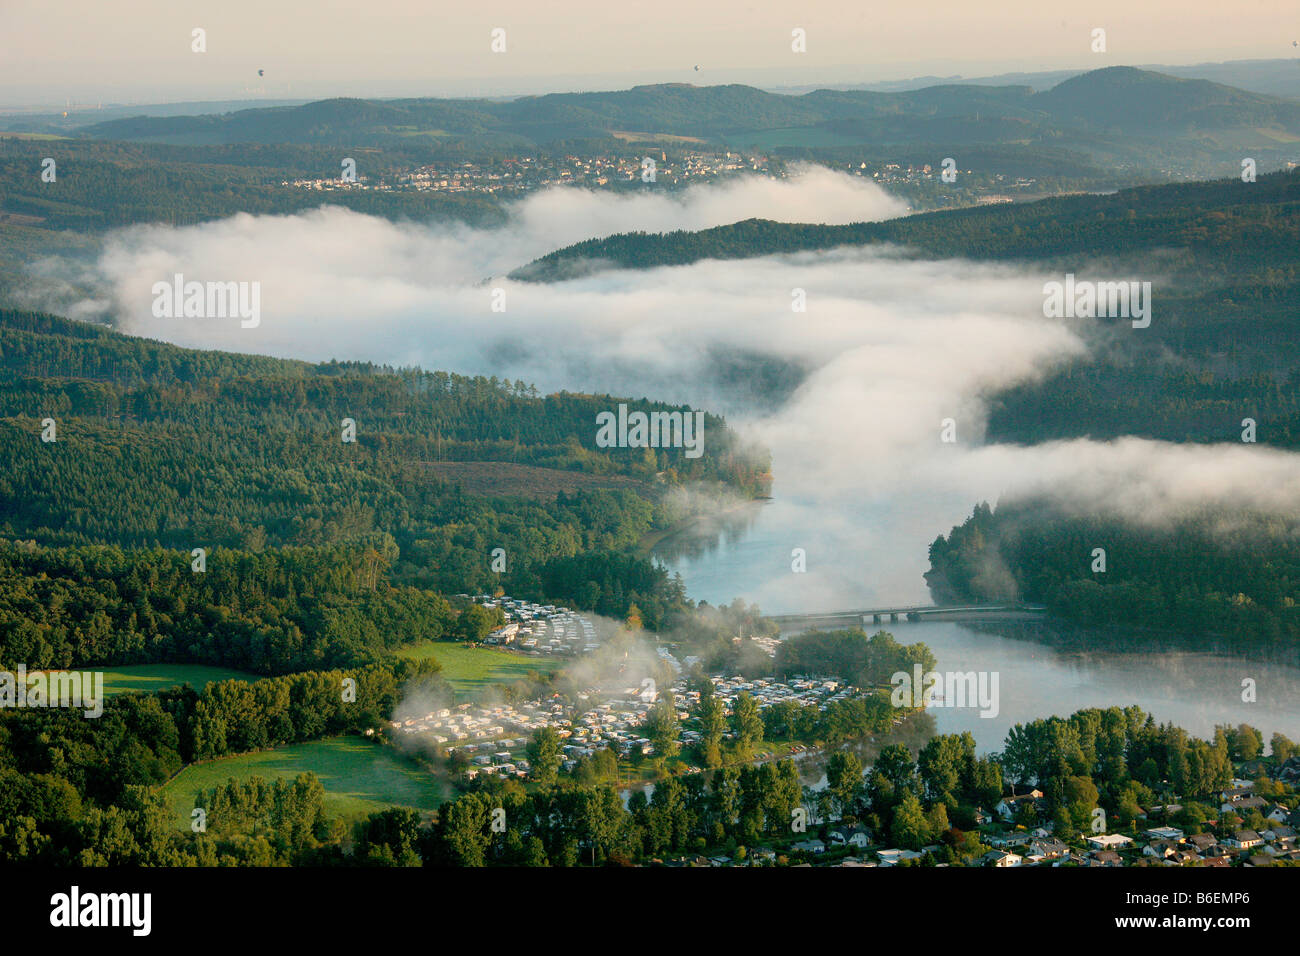 Aerial photograph, forested area, wafts of mist, Sorpesee, Sundern, Amecke, Illingheim, Sauerland, North Rhine-Westphalia, Germ Stock Photo